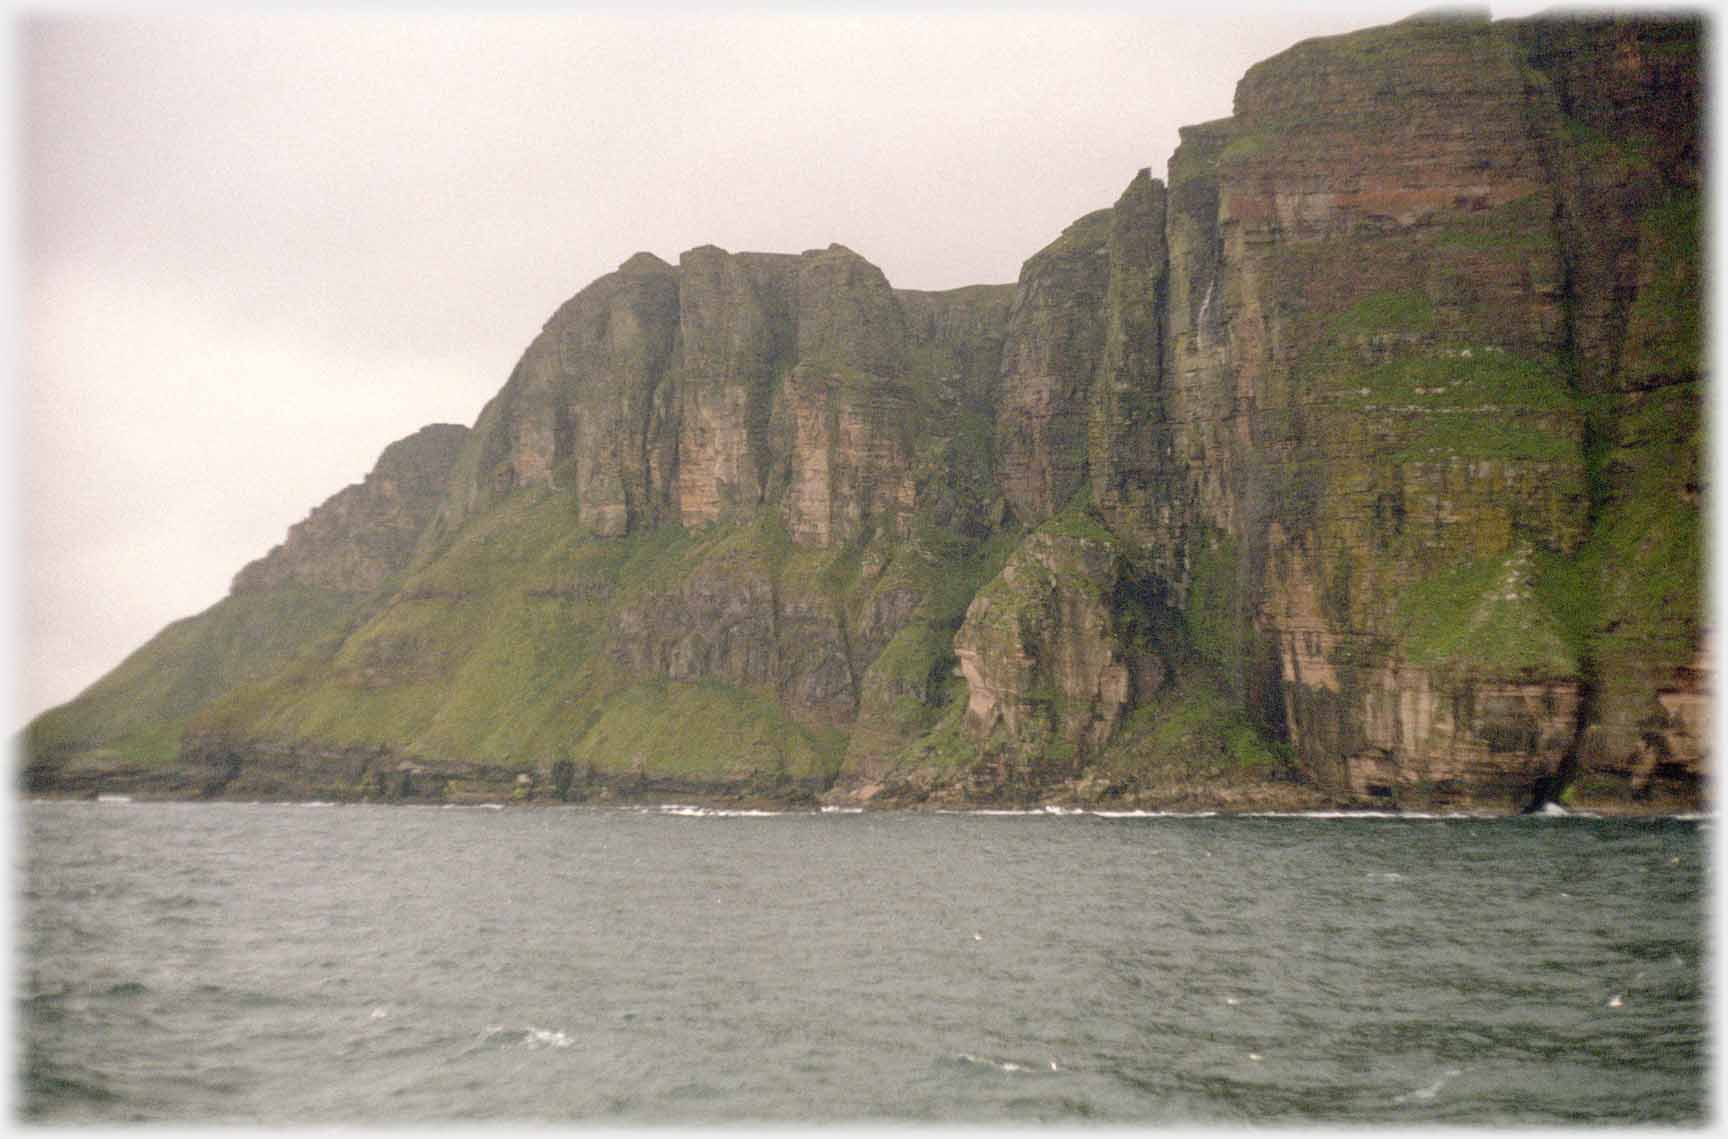 Cliffs rising from the sea at an angle.